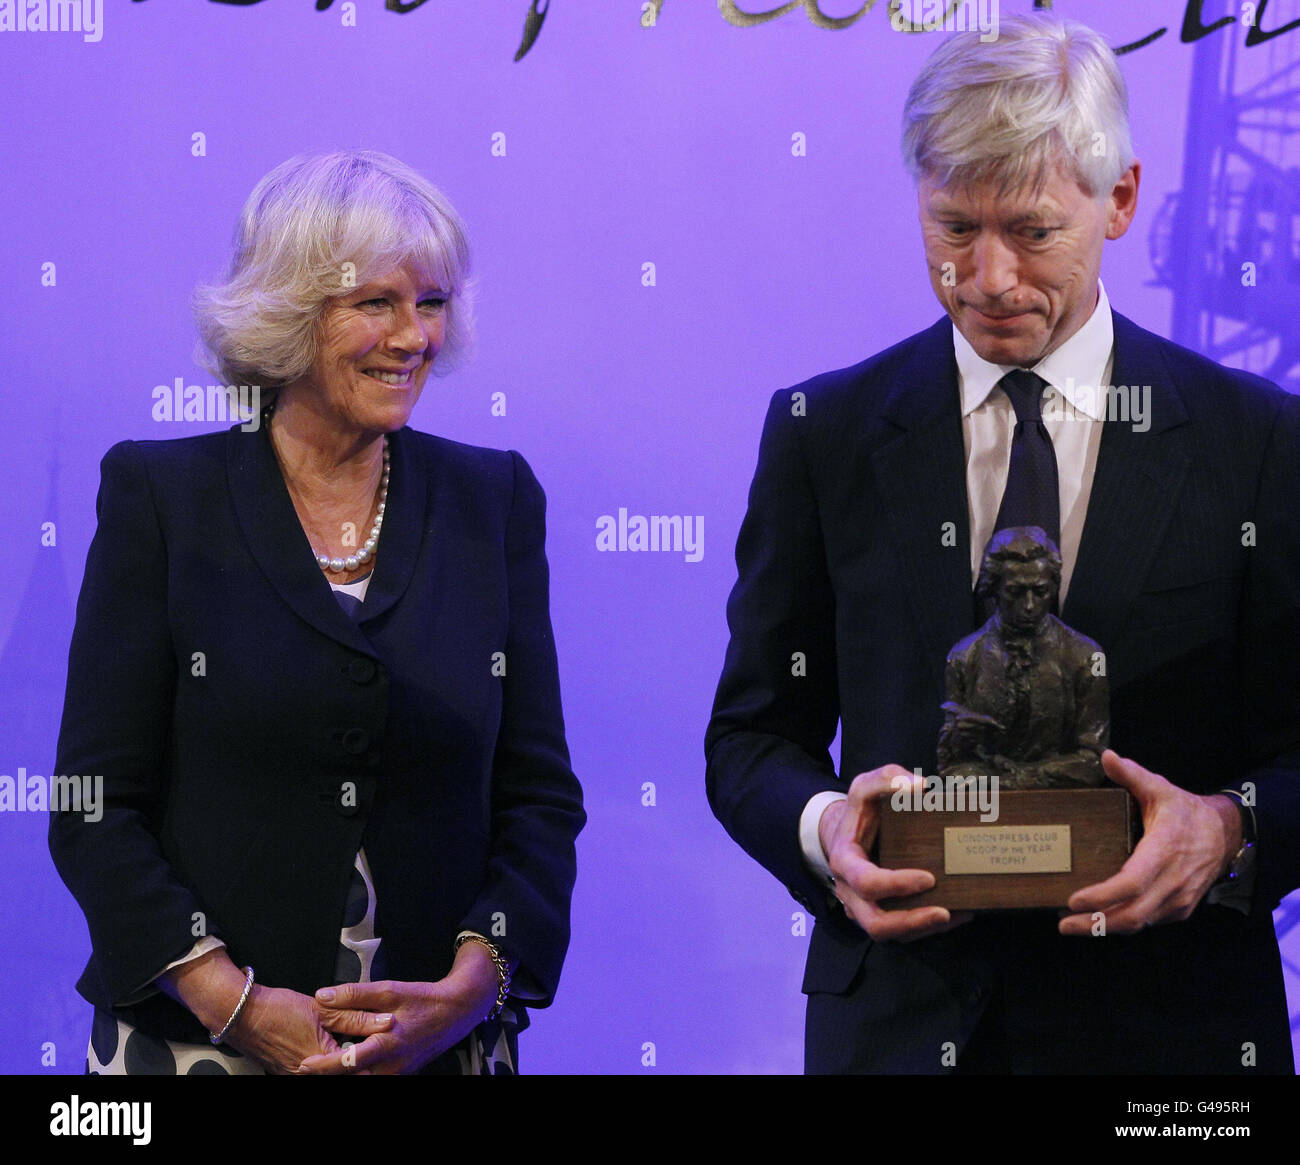 The Duchess of Cornwall presents Bob Tyrer of The Sunday Times with the Scoop of the Year Award at the London Press Club Awards in London. Stock Photo